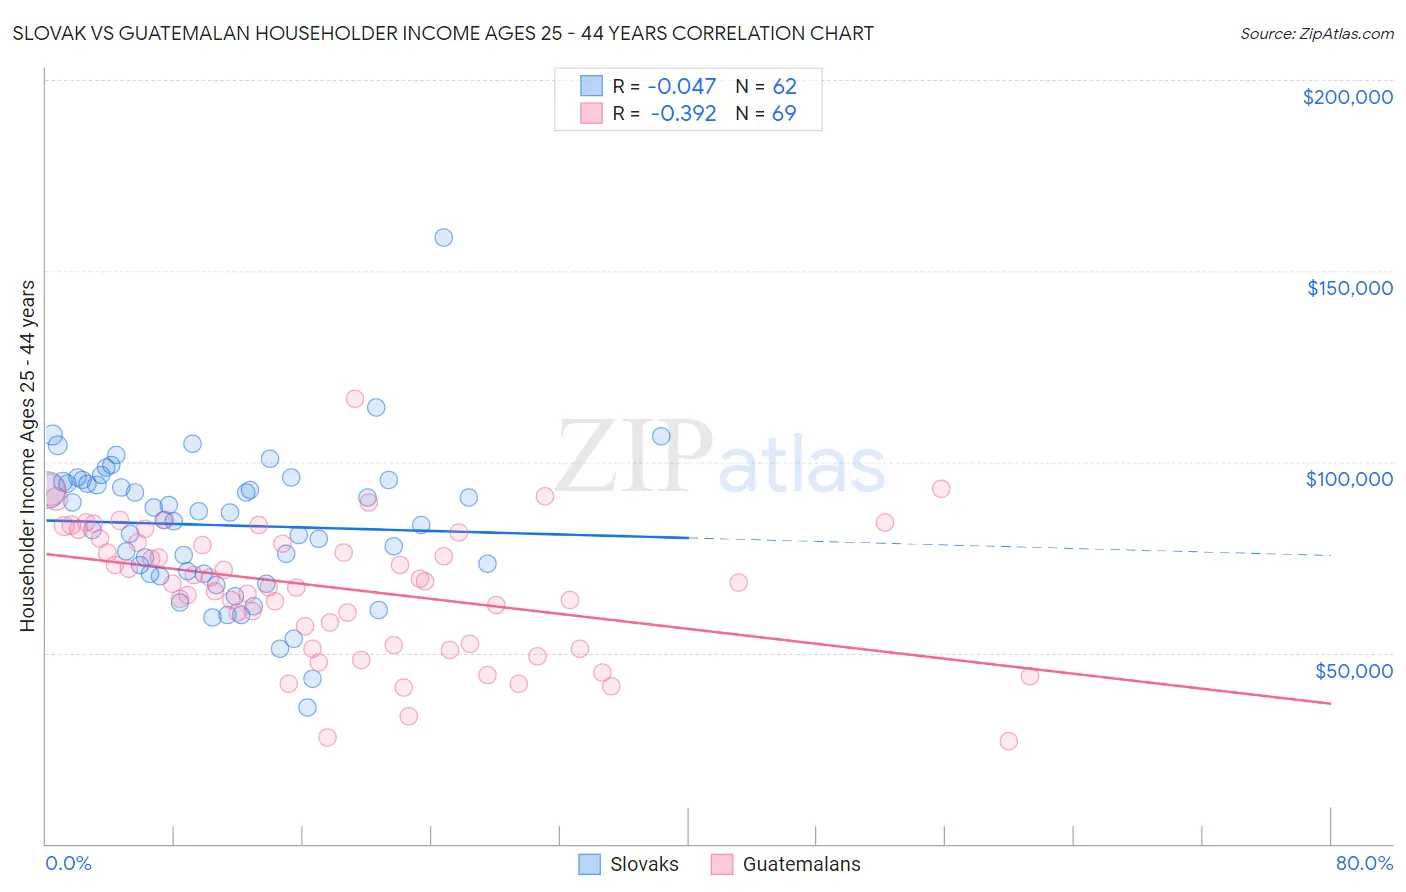 Slovak vs Guatemalan Householder Income Ages 25 - 44 years